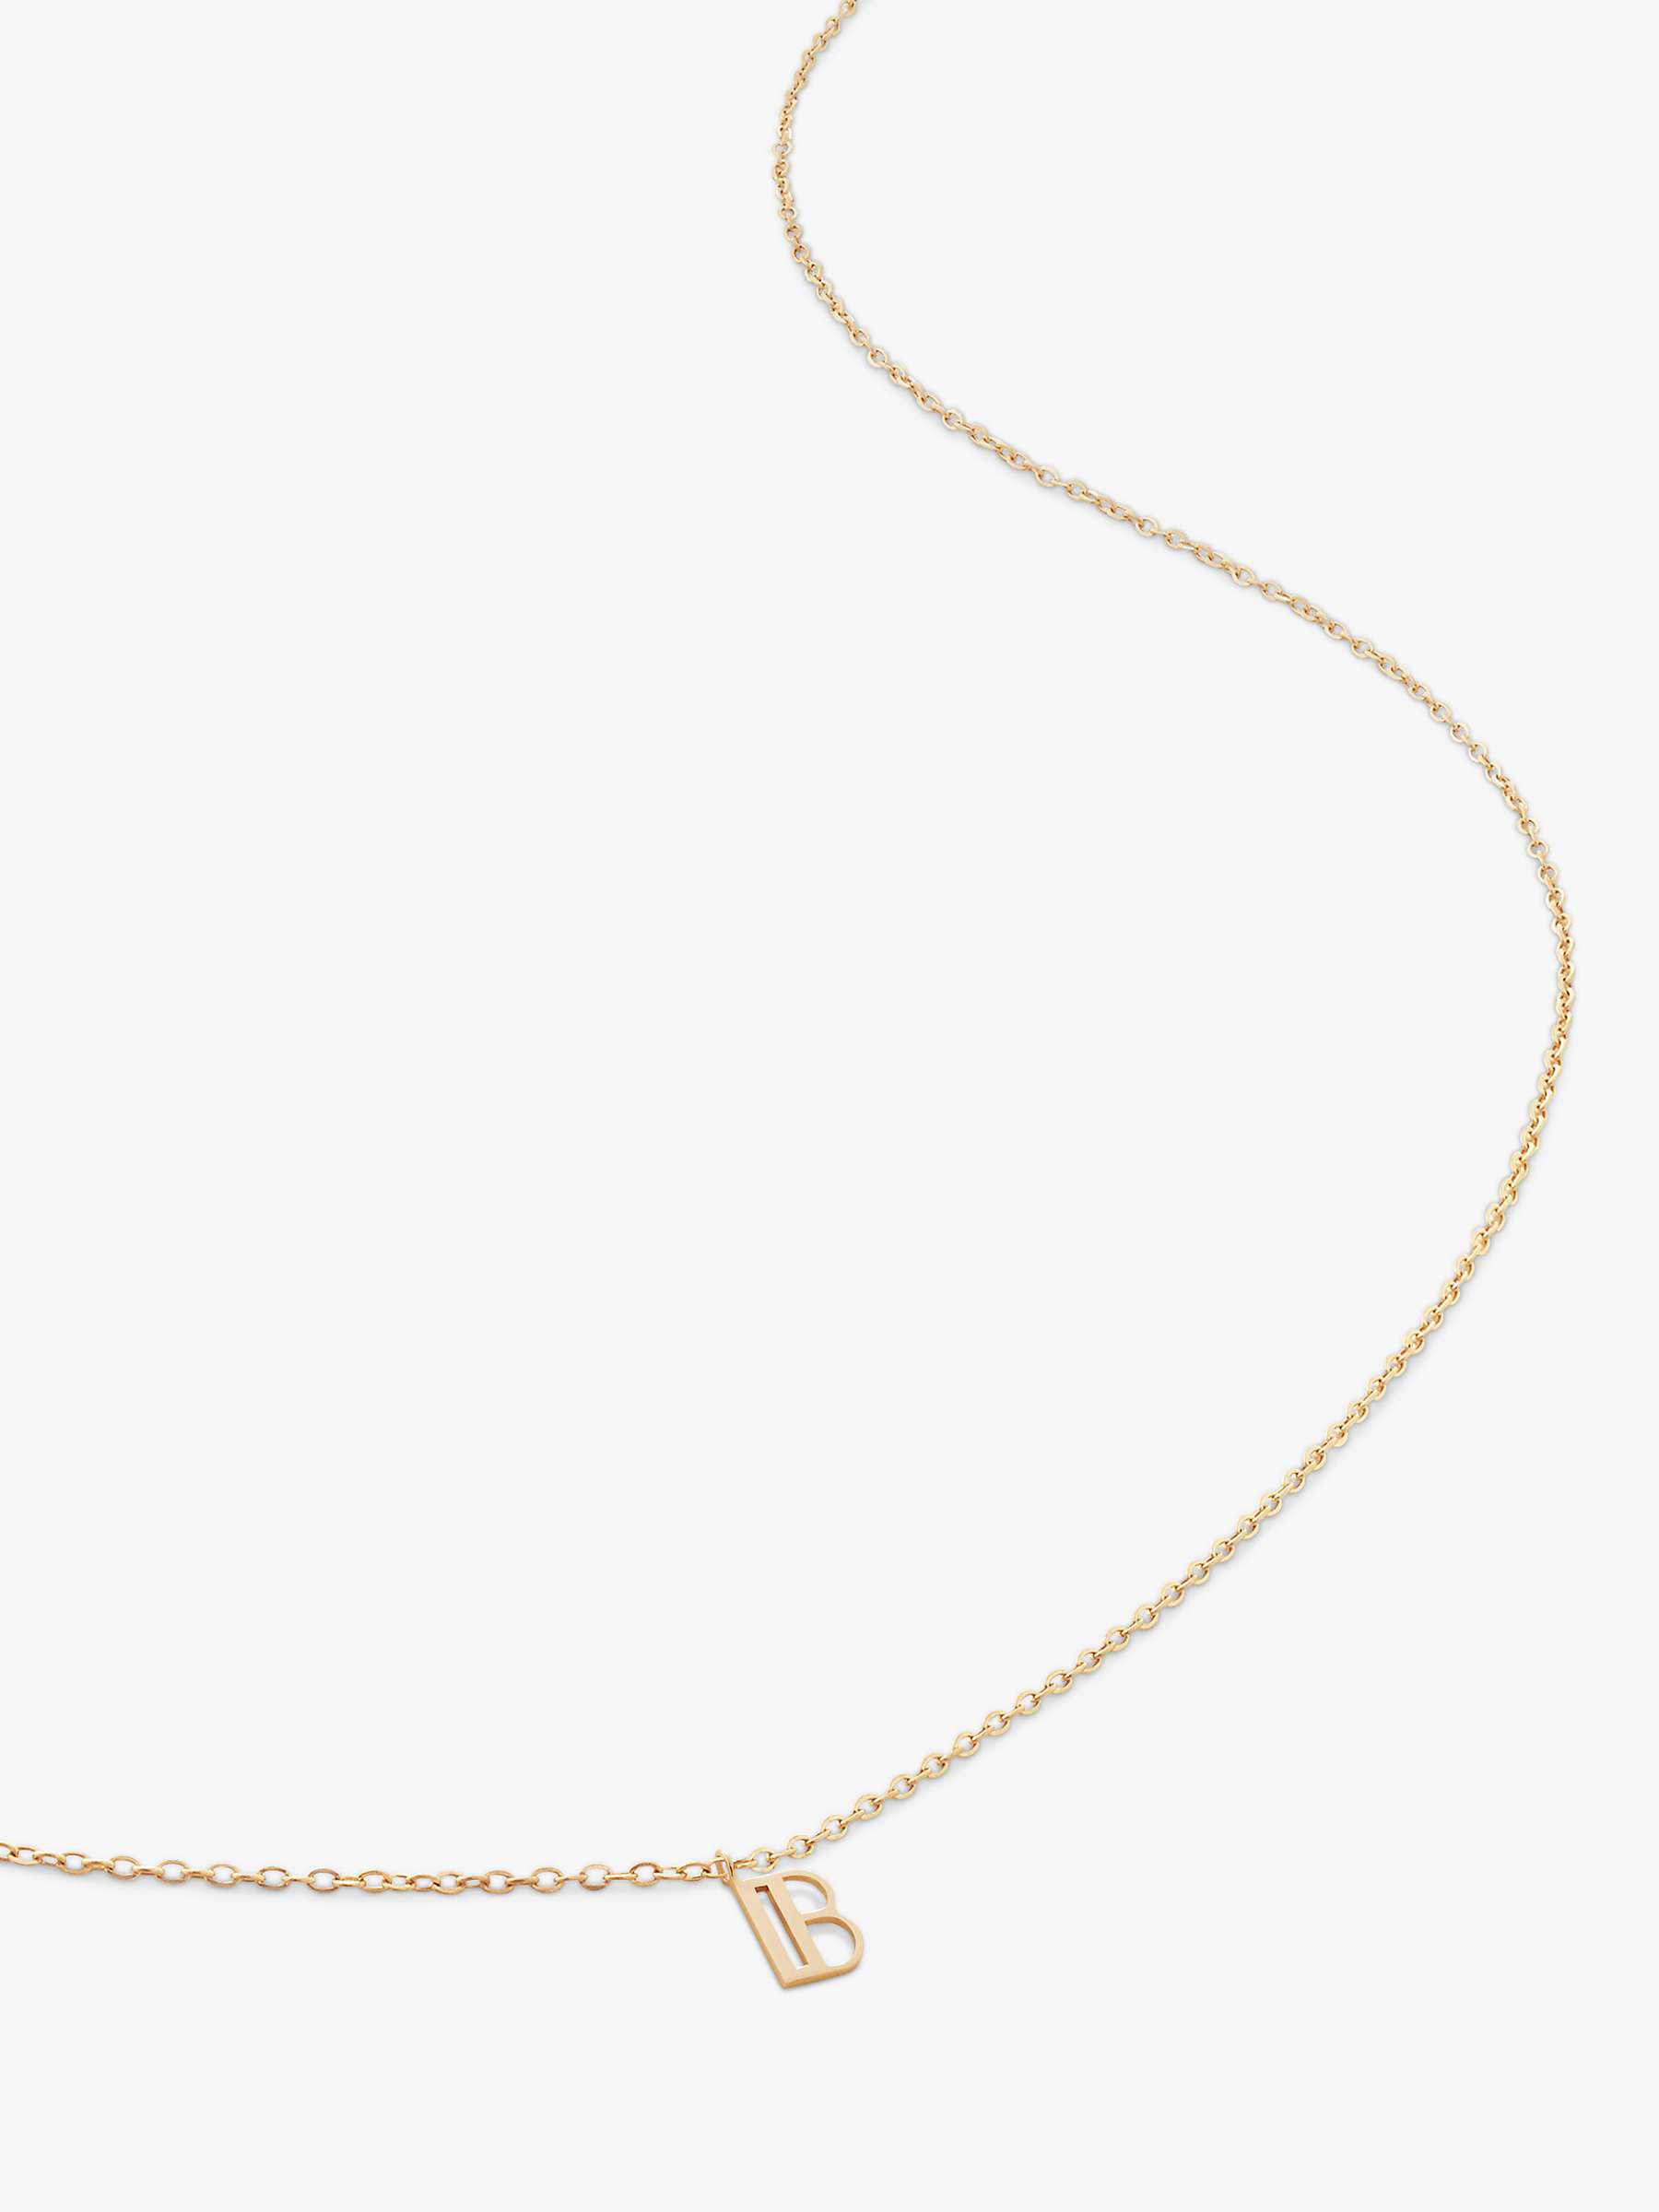 Buy Monica Vinader Yellow Gold Small Initial Pendant Necklace, Gold Online at johnlewis.com